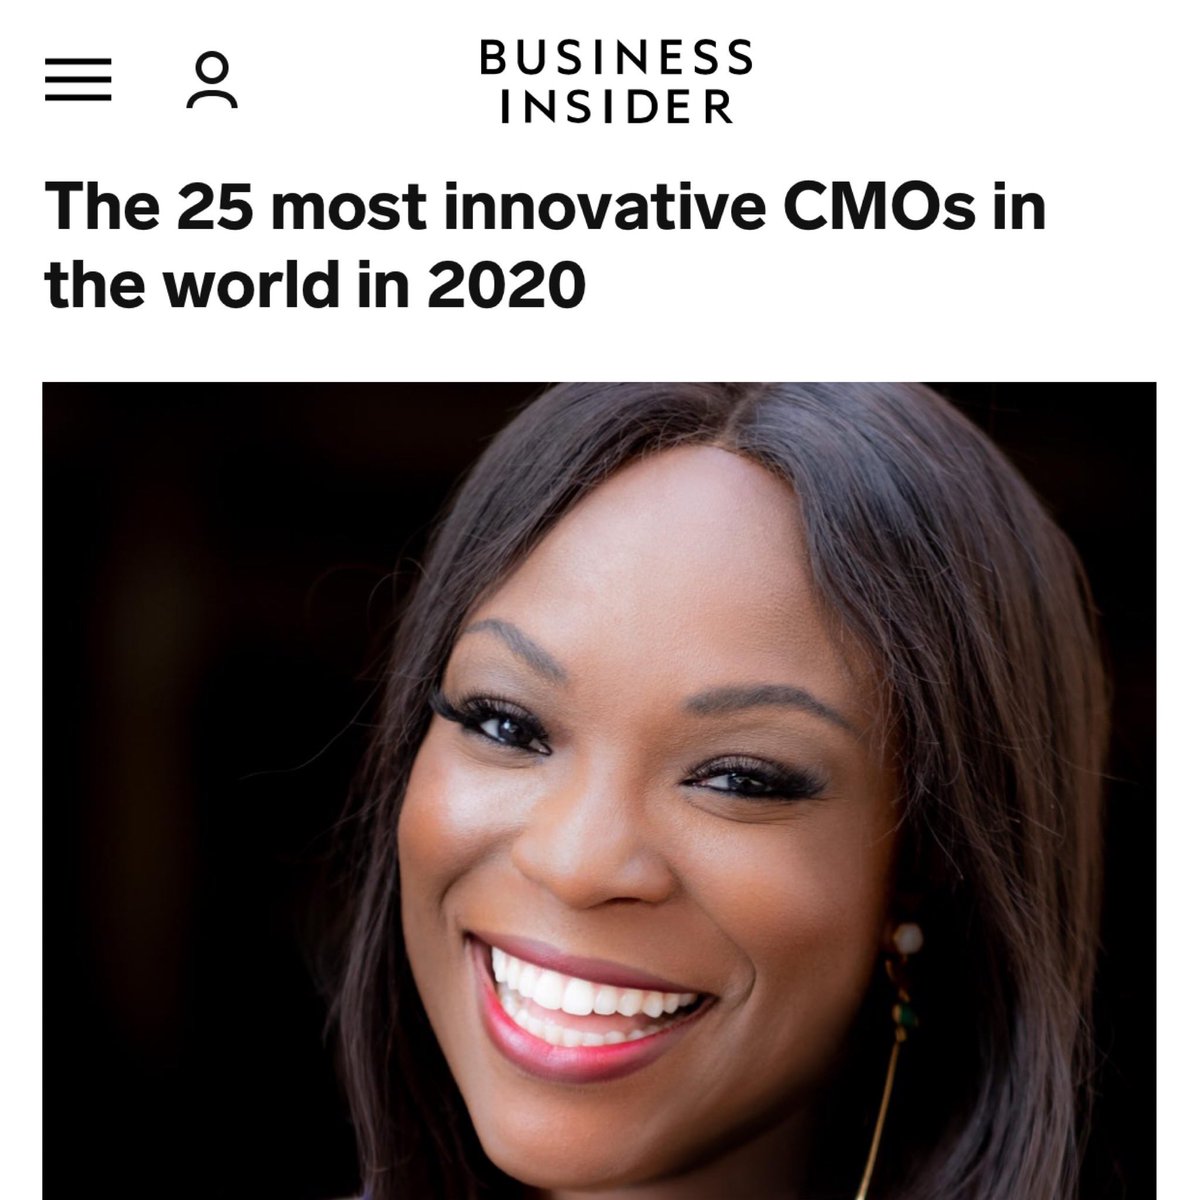 Thank you @businessinsider for recognizing the work we are doing @Carbon. I couldn’t do what I do without my amazing team. So, this recognition is really for them. Thank you to @EllenKullman and @Joseph_DeSimone whose leadership make it all possible. businessinsider.com/the-most-innov…